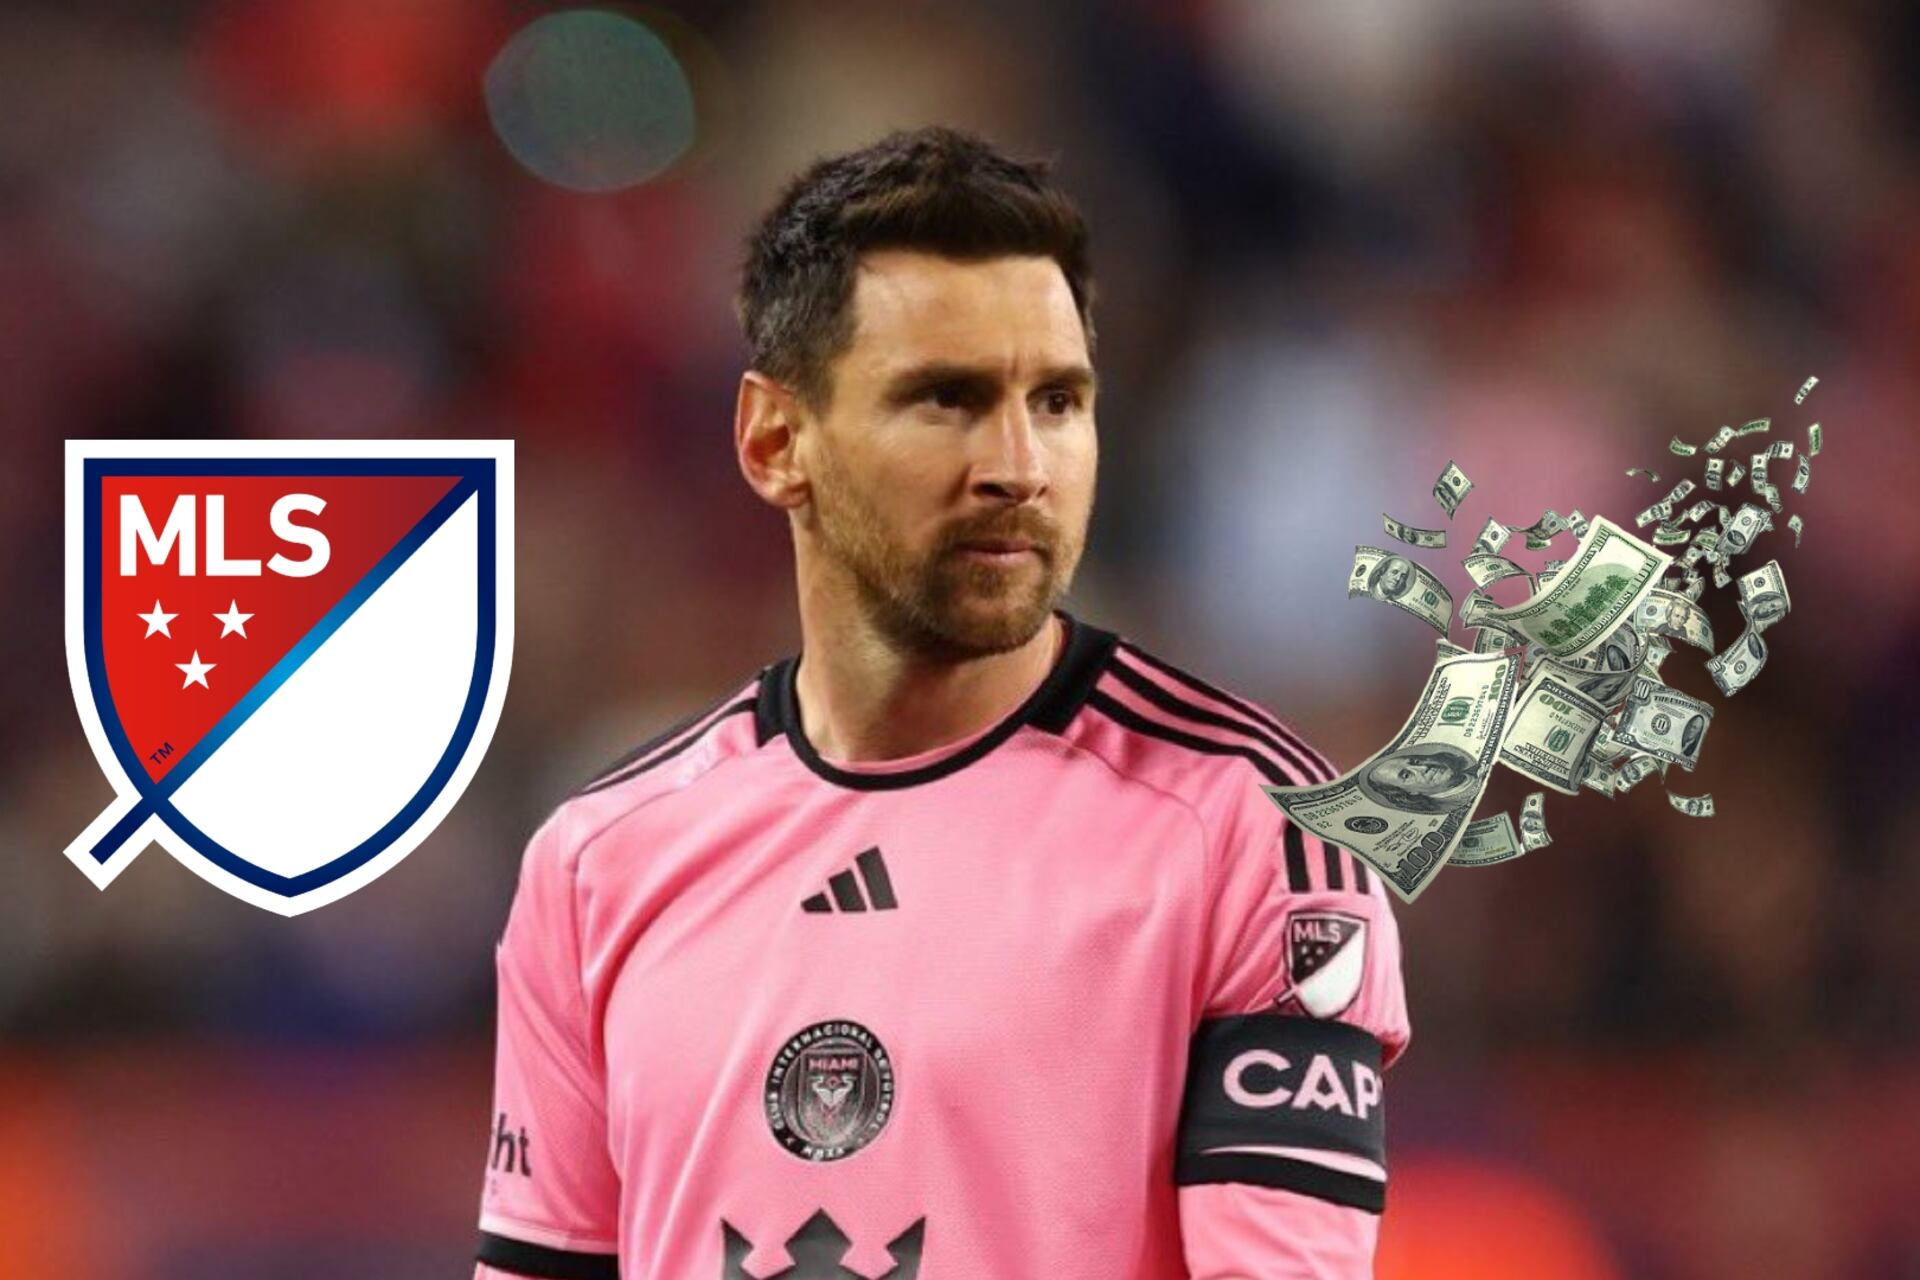 He rejected $200M from Saudi and now he earns this, Messi’s official salary at MLS is revealed and is lower than expected